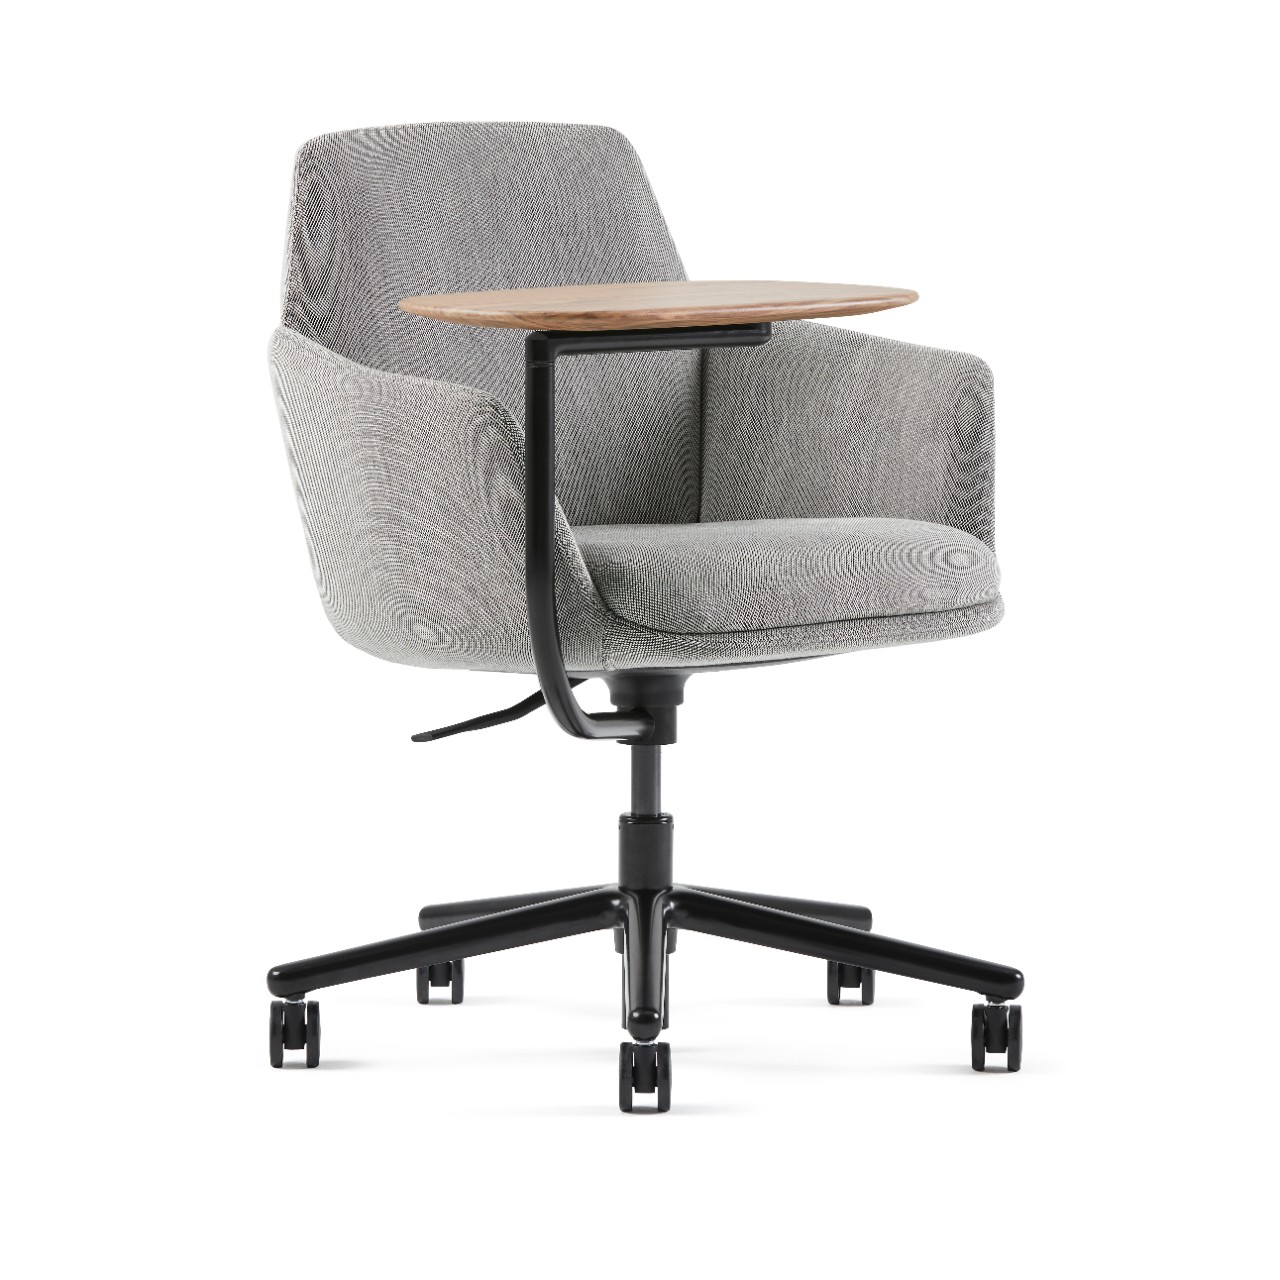 HAWORTH, Seating, Furnish comfortable, flexible spaces that support a variety of work processes. A range of base options-one